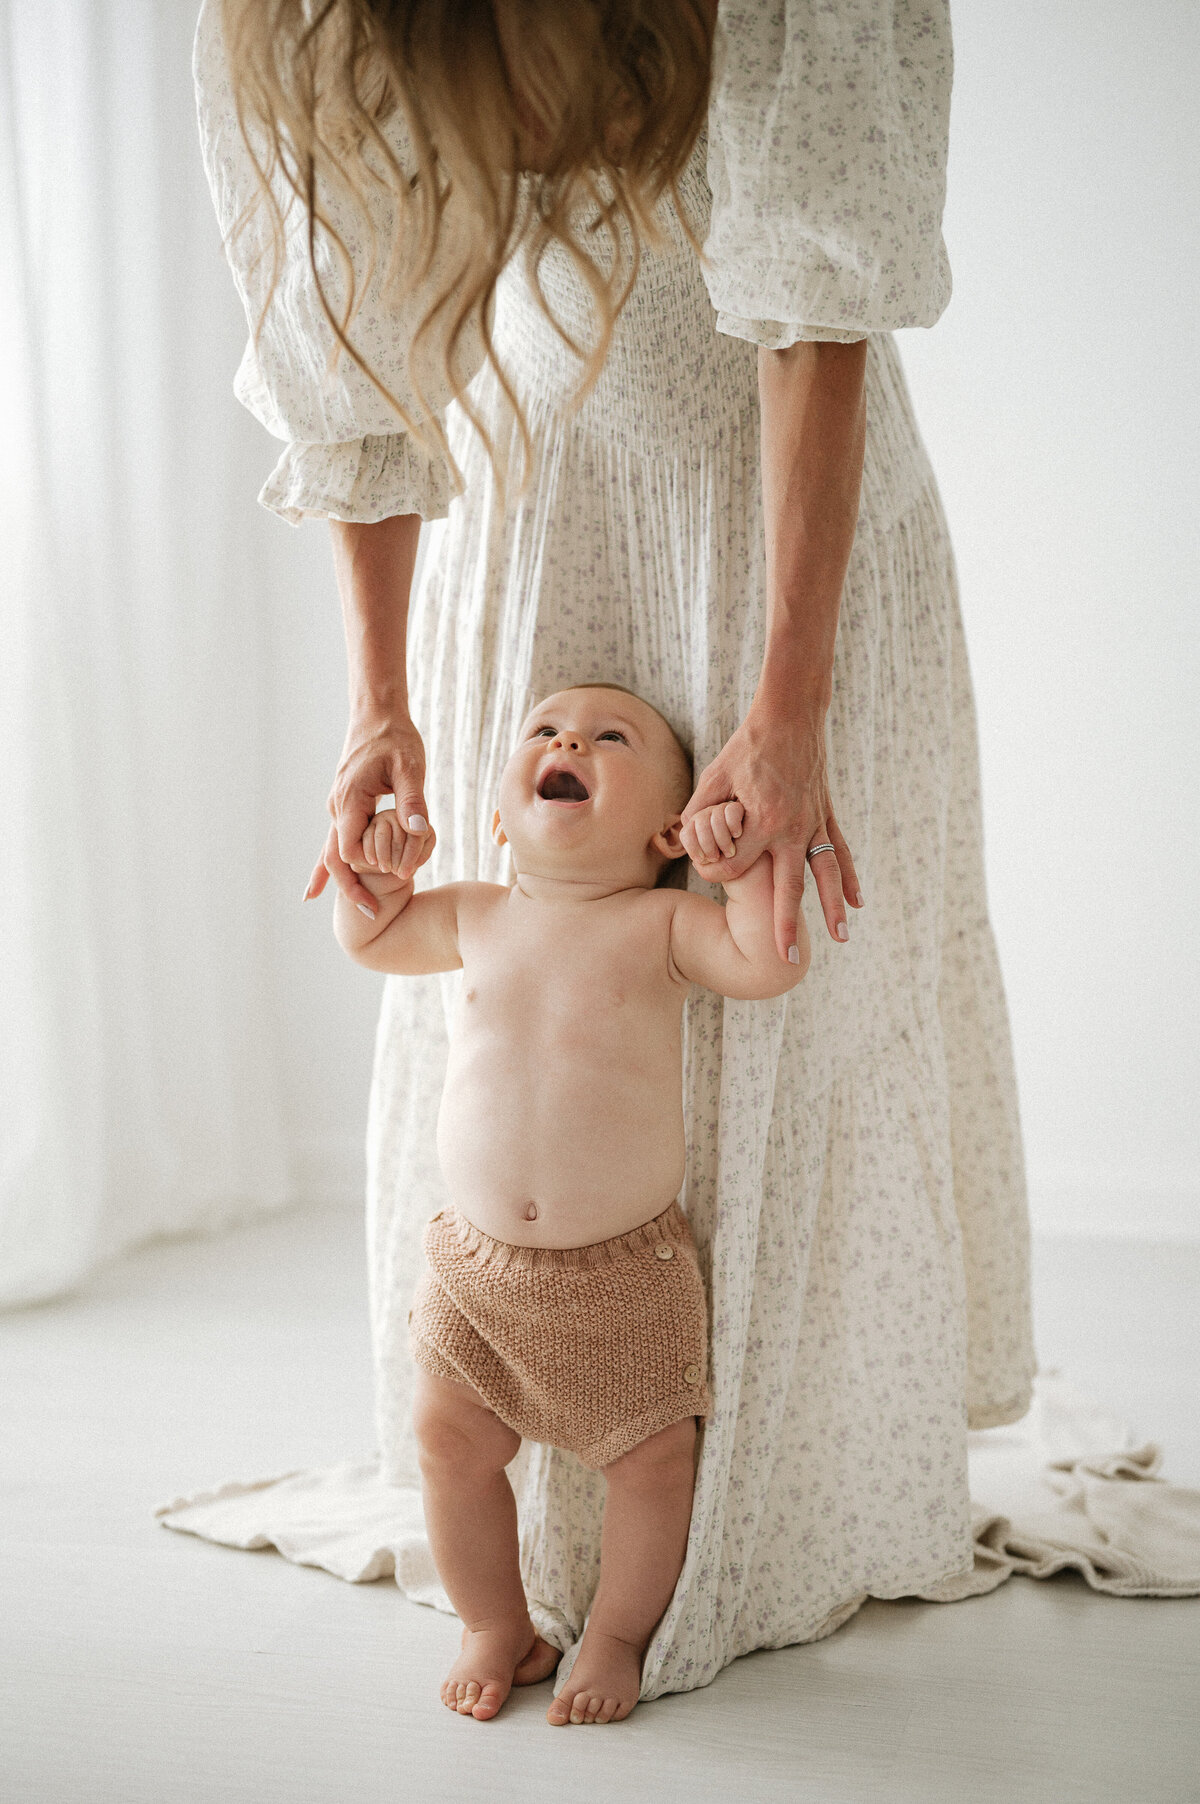 Studio photoshoot of a mother baby helping her baby stand